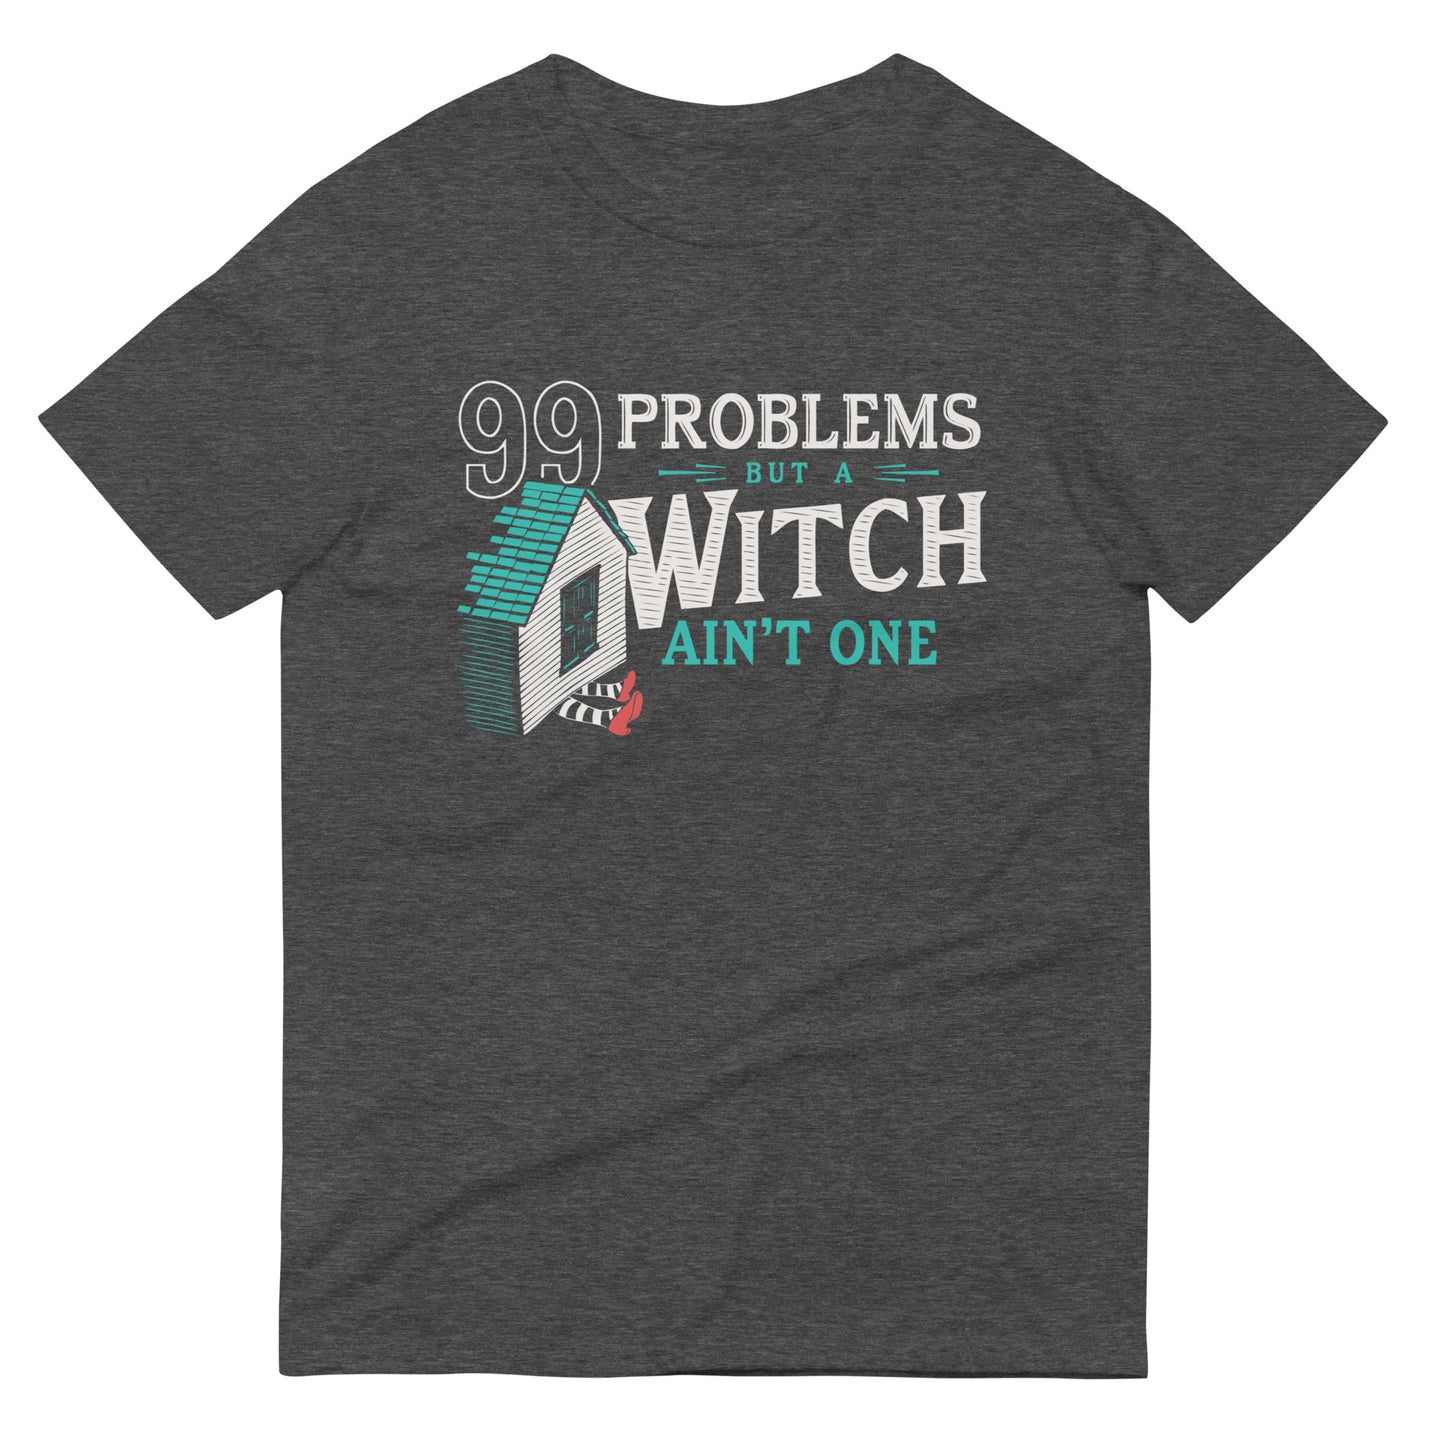 99 Problems But A Witch Ain't One Men's Signature Tee